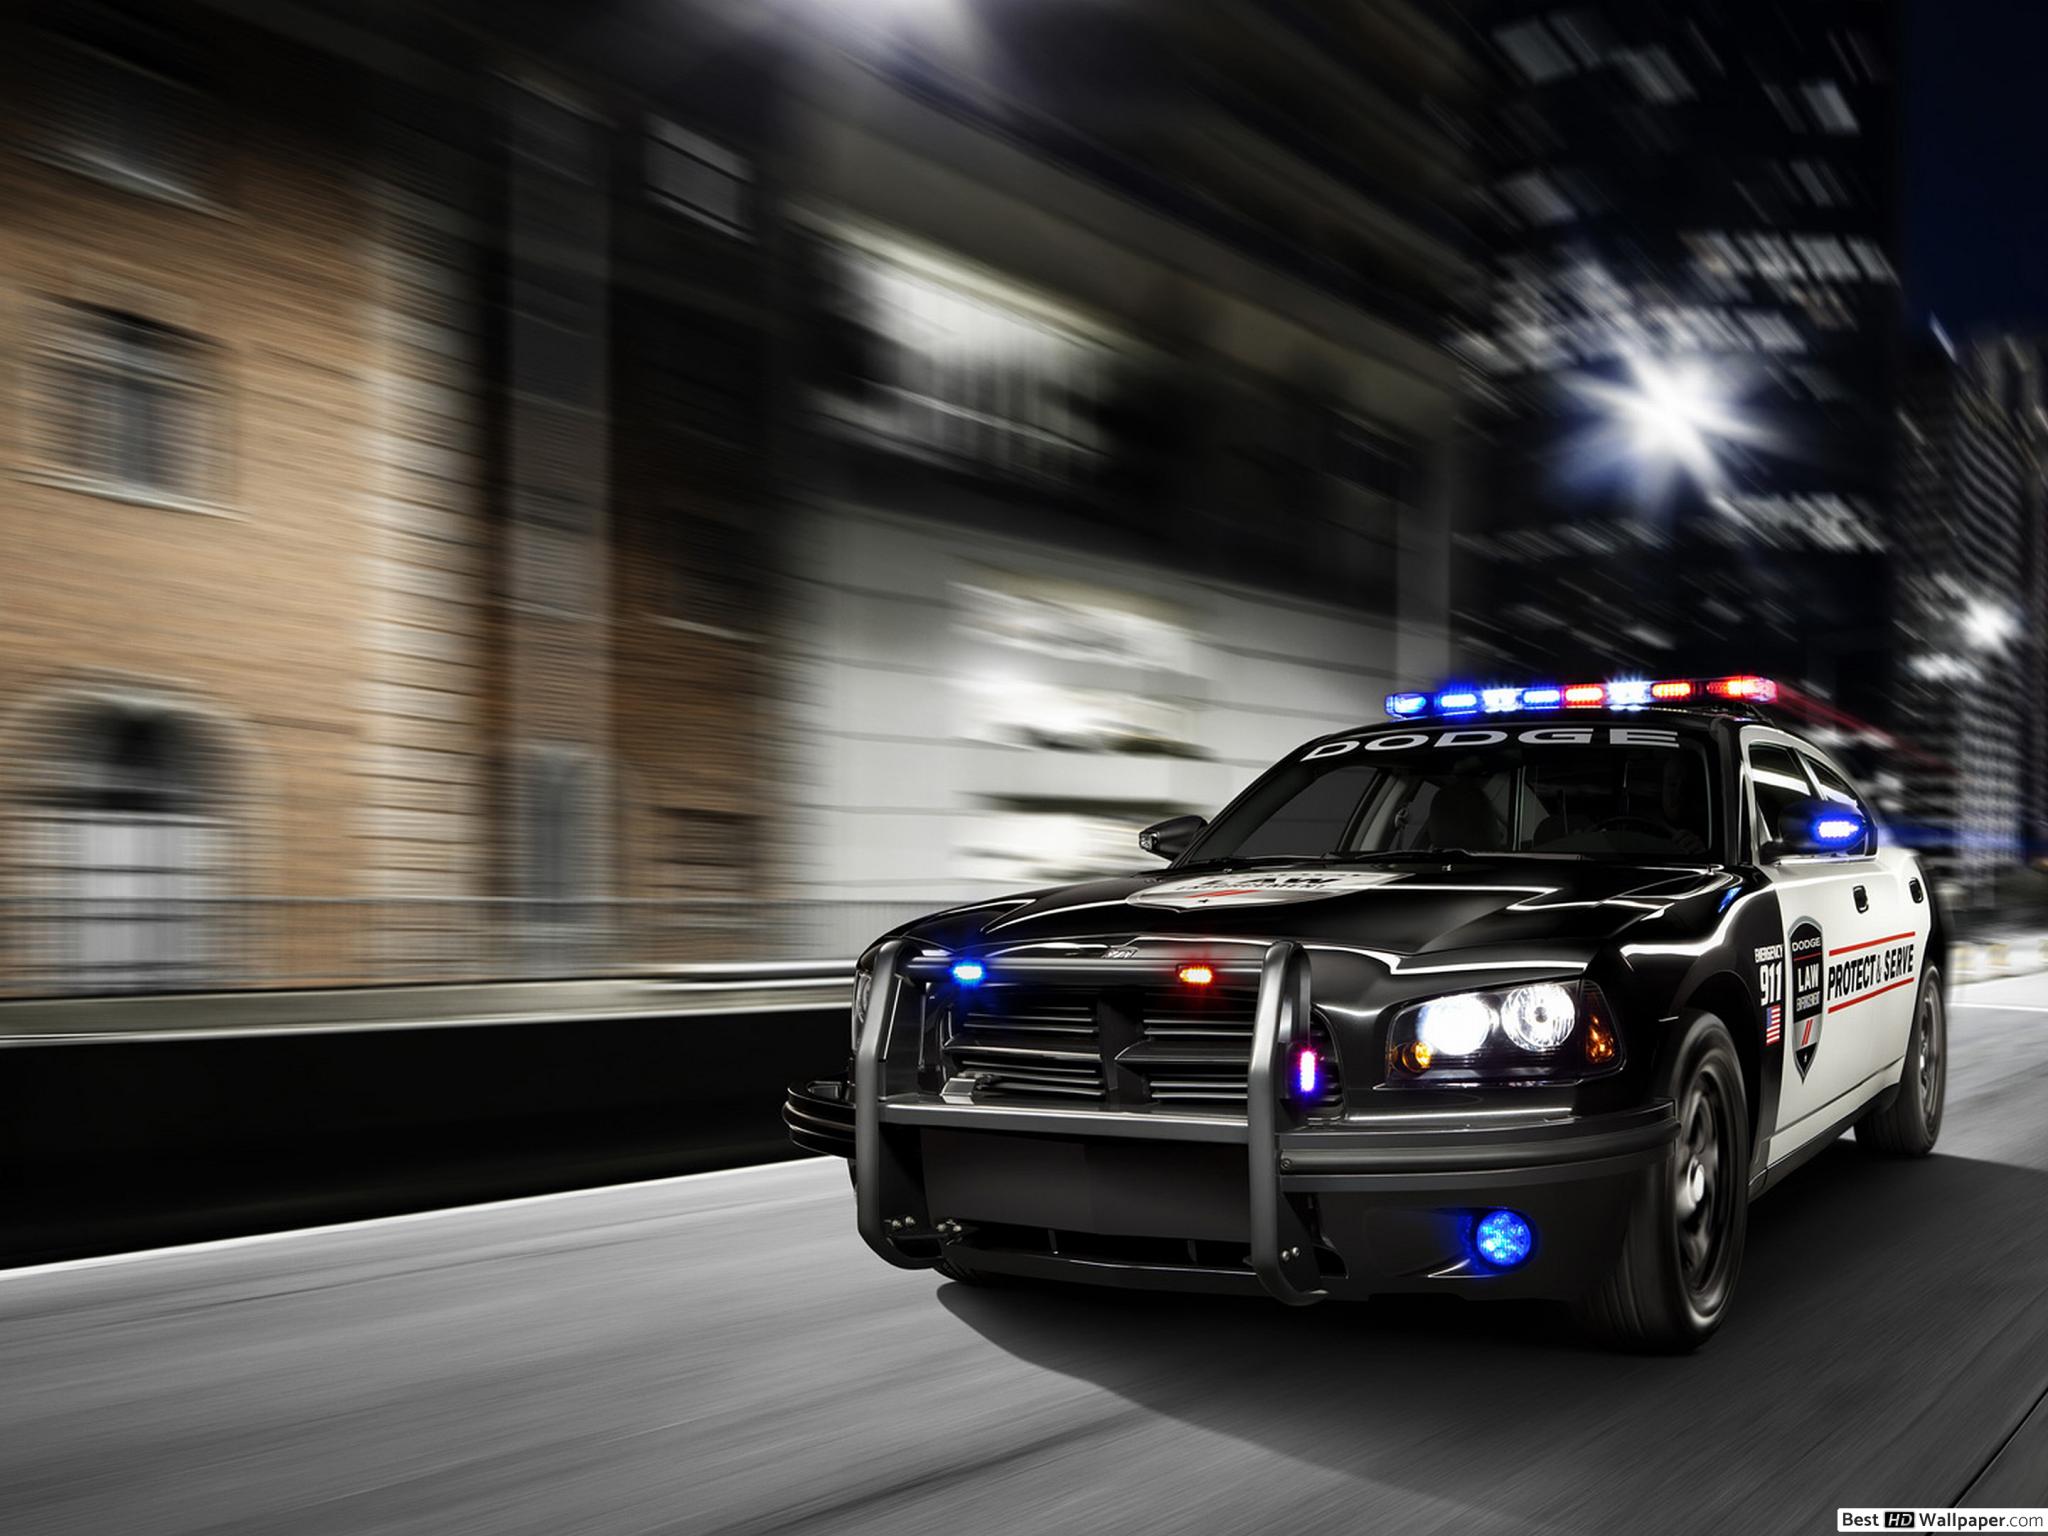 Police Night Mobile HD wallpaper download